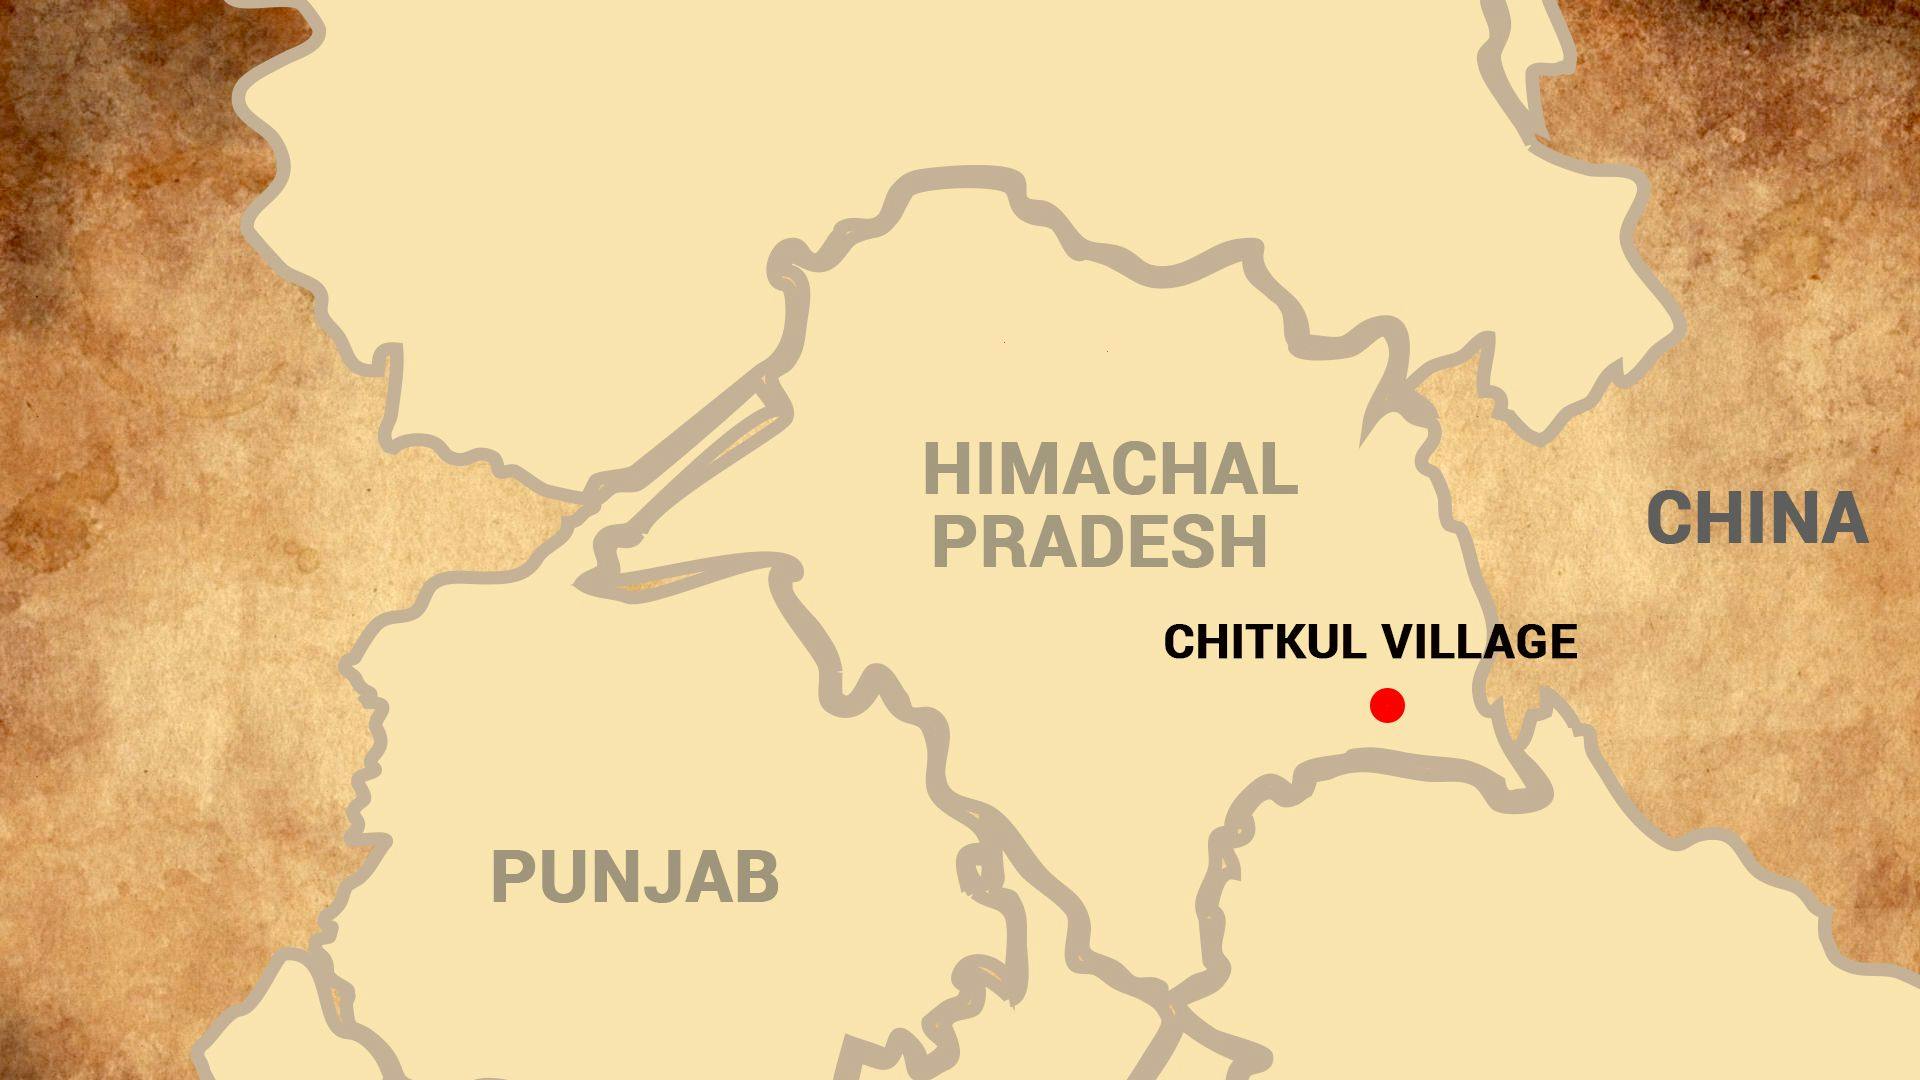 Location of the village